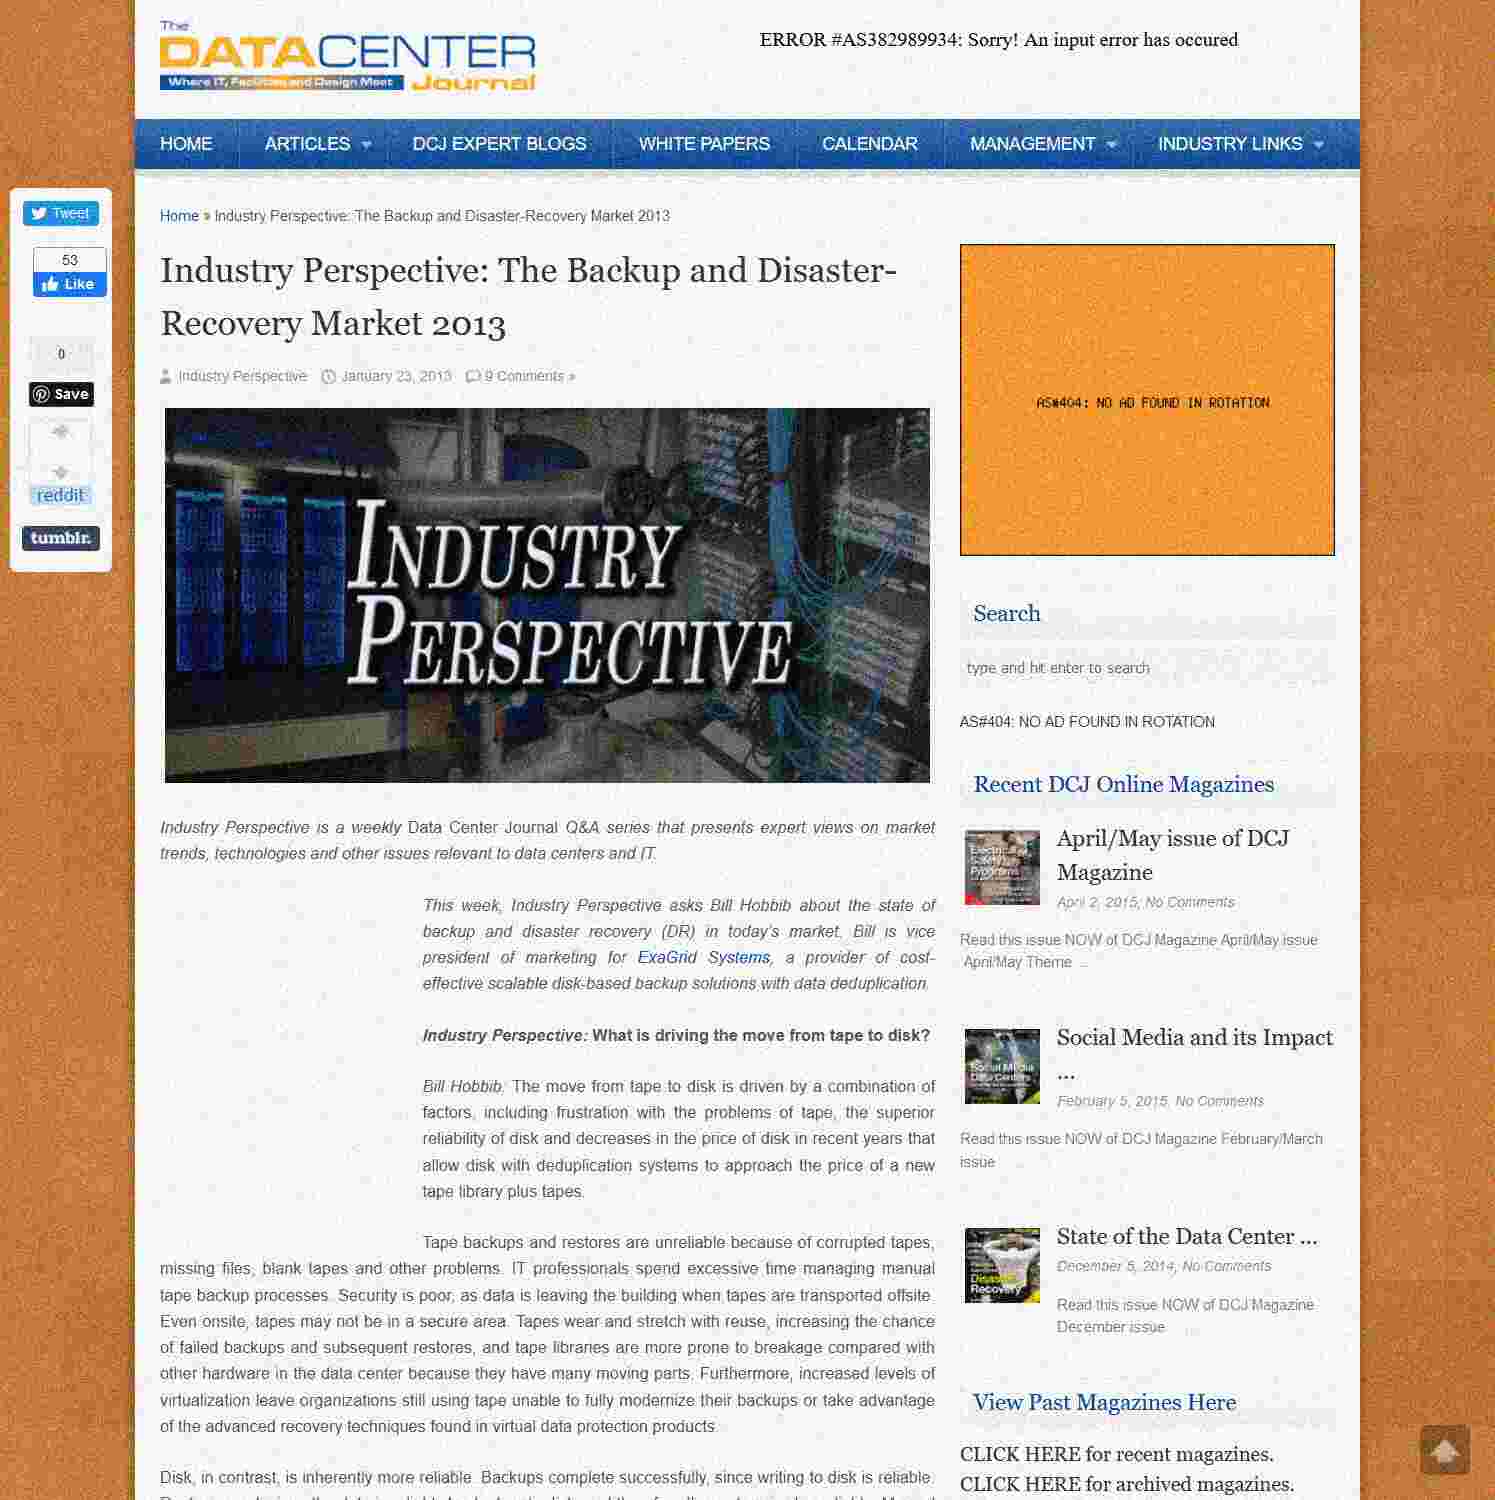 Illustration of Industry Perspective: The Backup and Disaster-Recovery Market 2013